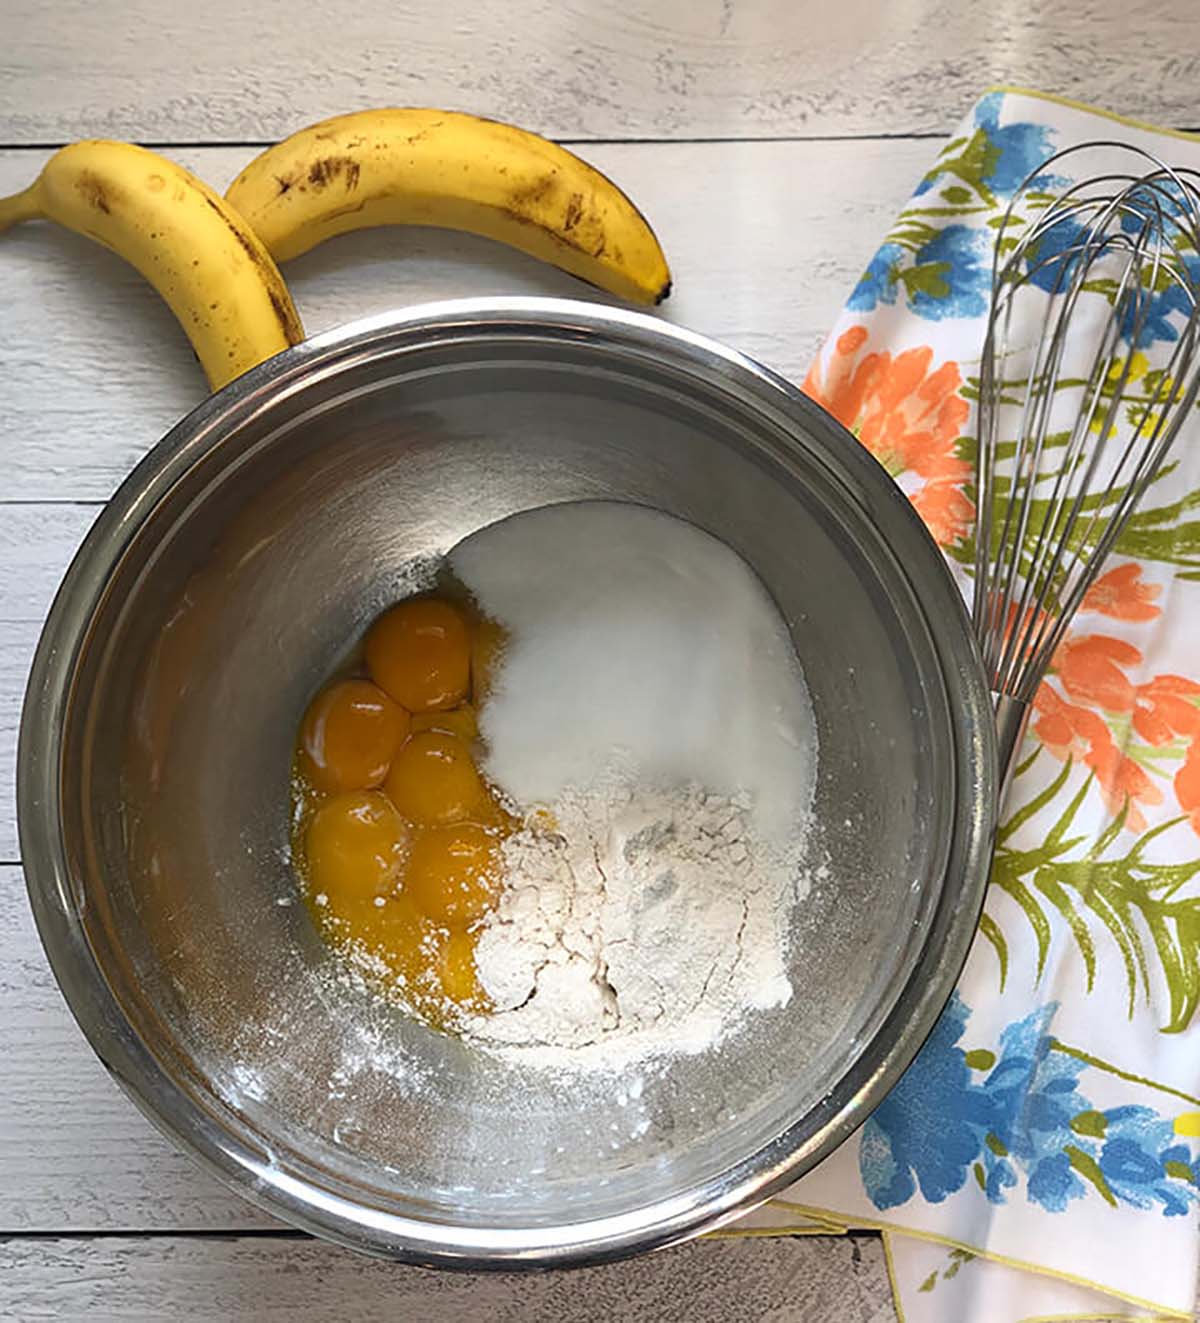 A stainless steel mixing bowl containing eggs, flour, and sugar, with a whisk and two bananas beside it on a floral cloth-covered table.